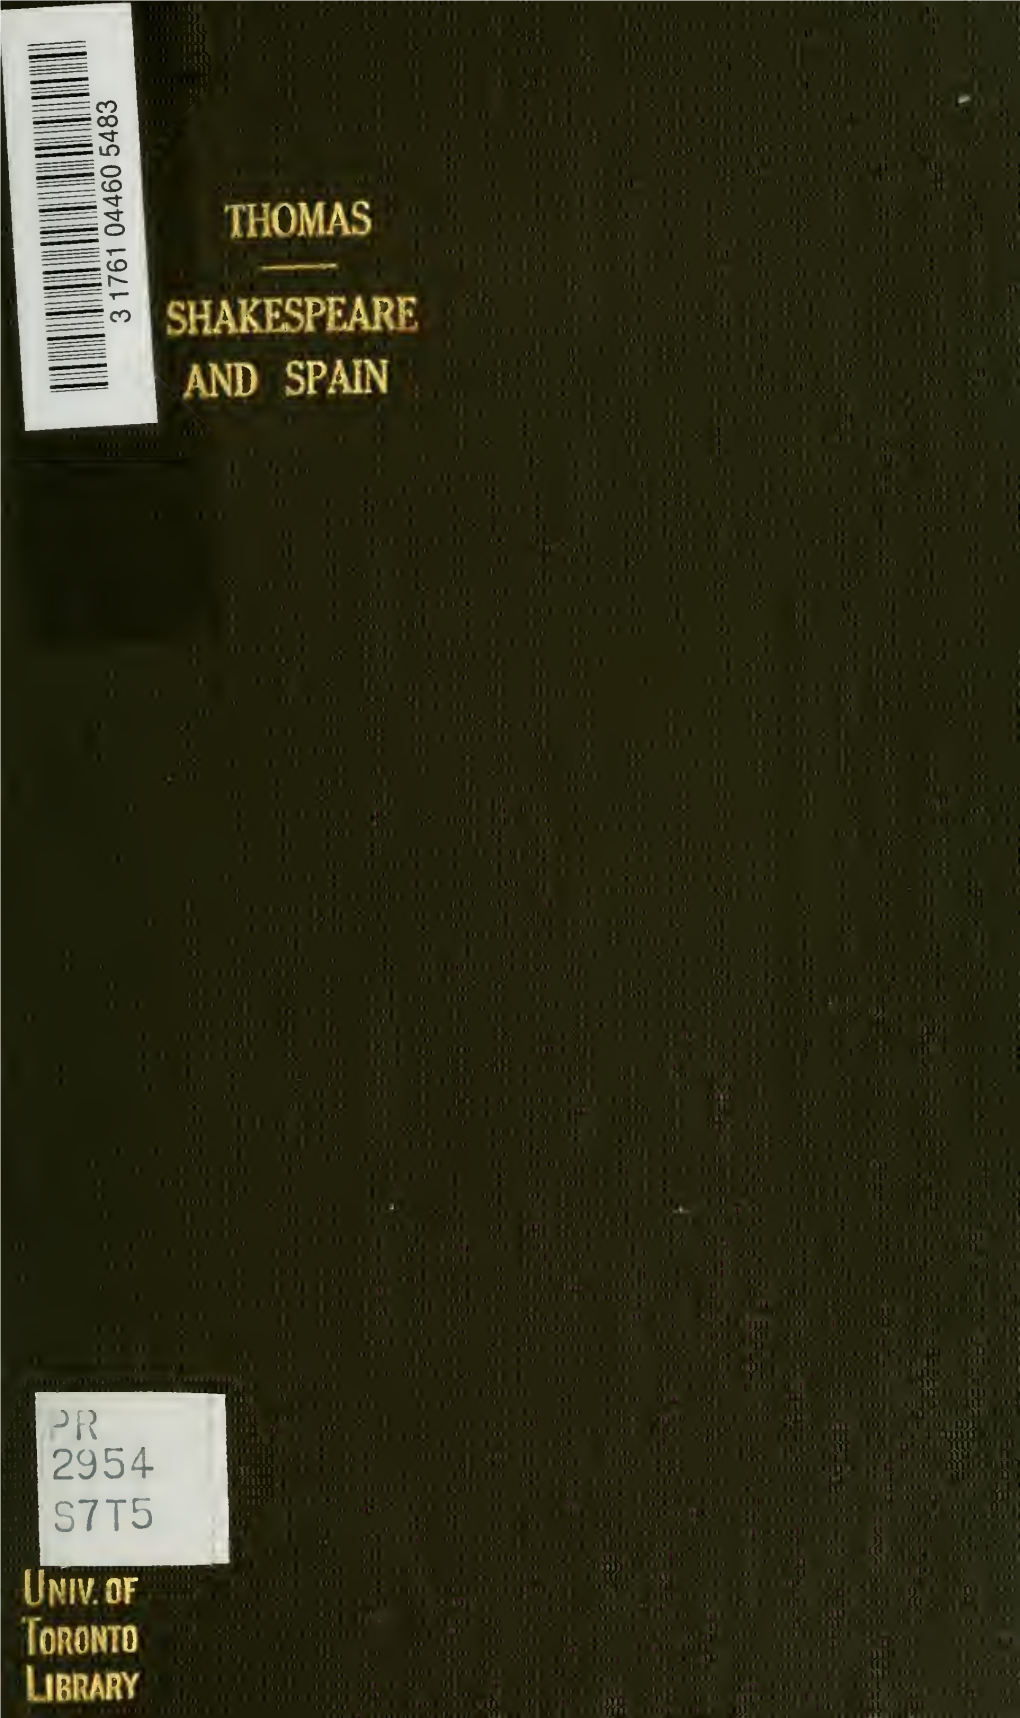 Shakespeare and Spain